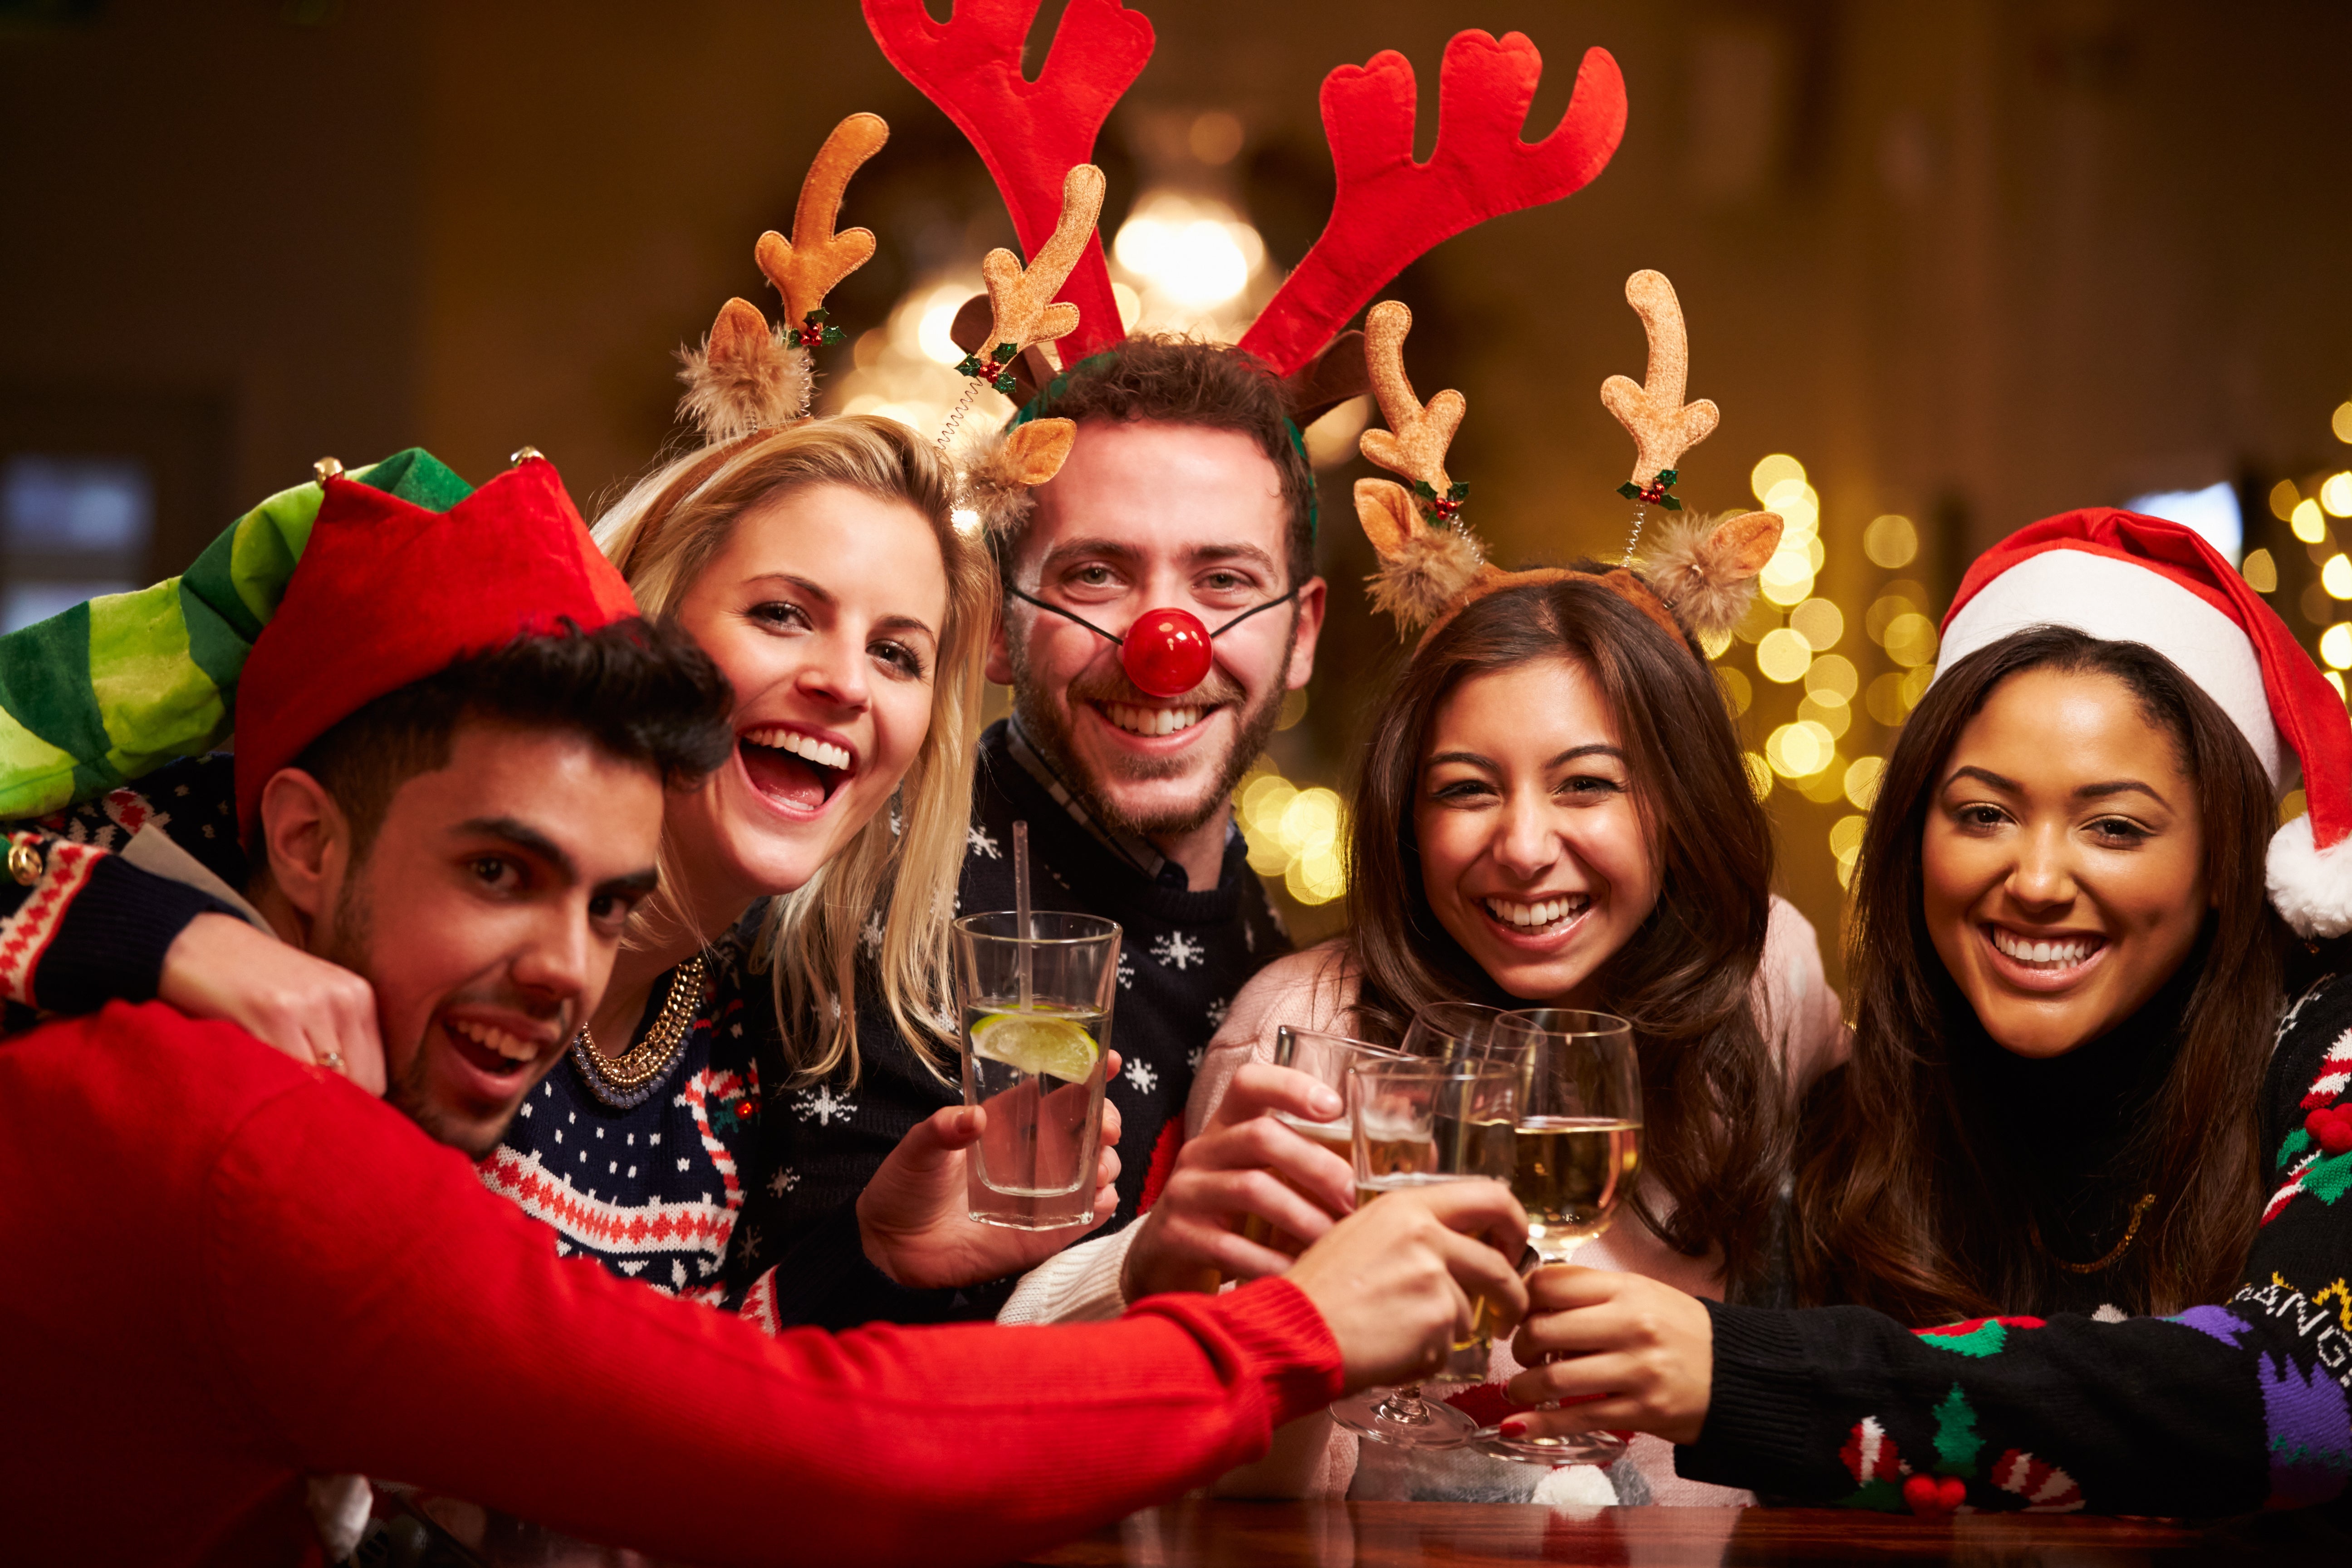 Group of friends together at Christmas - holiday photography example